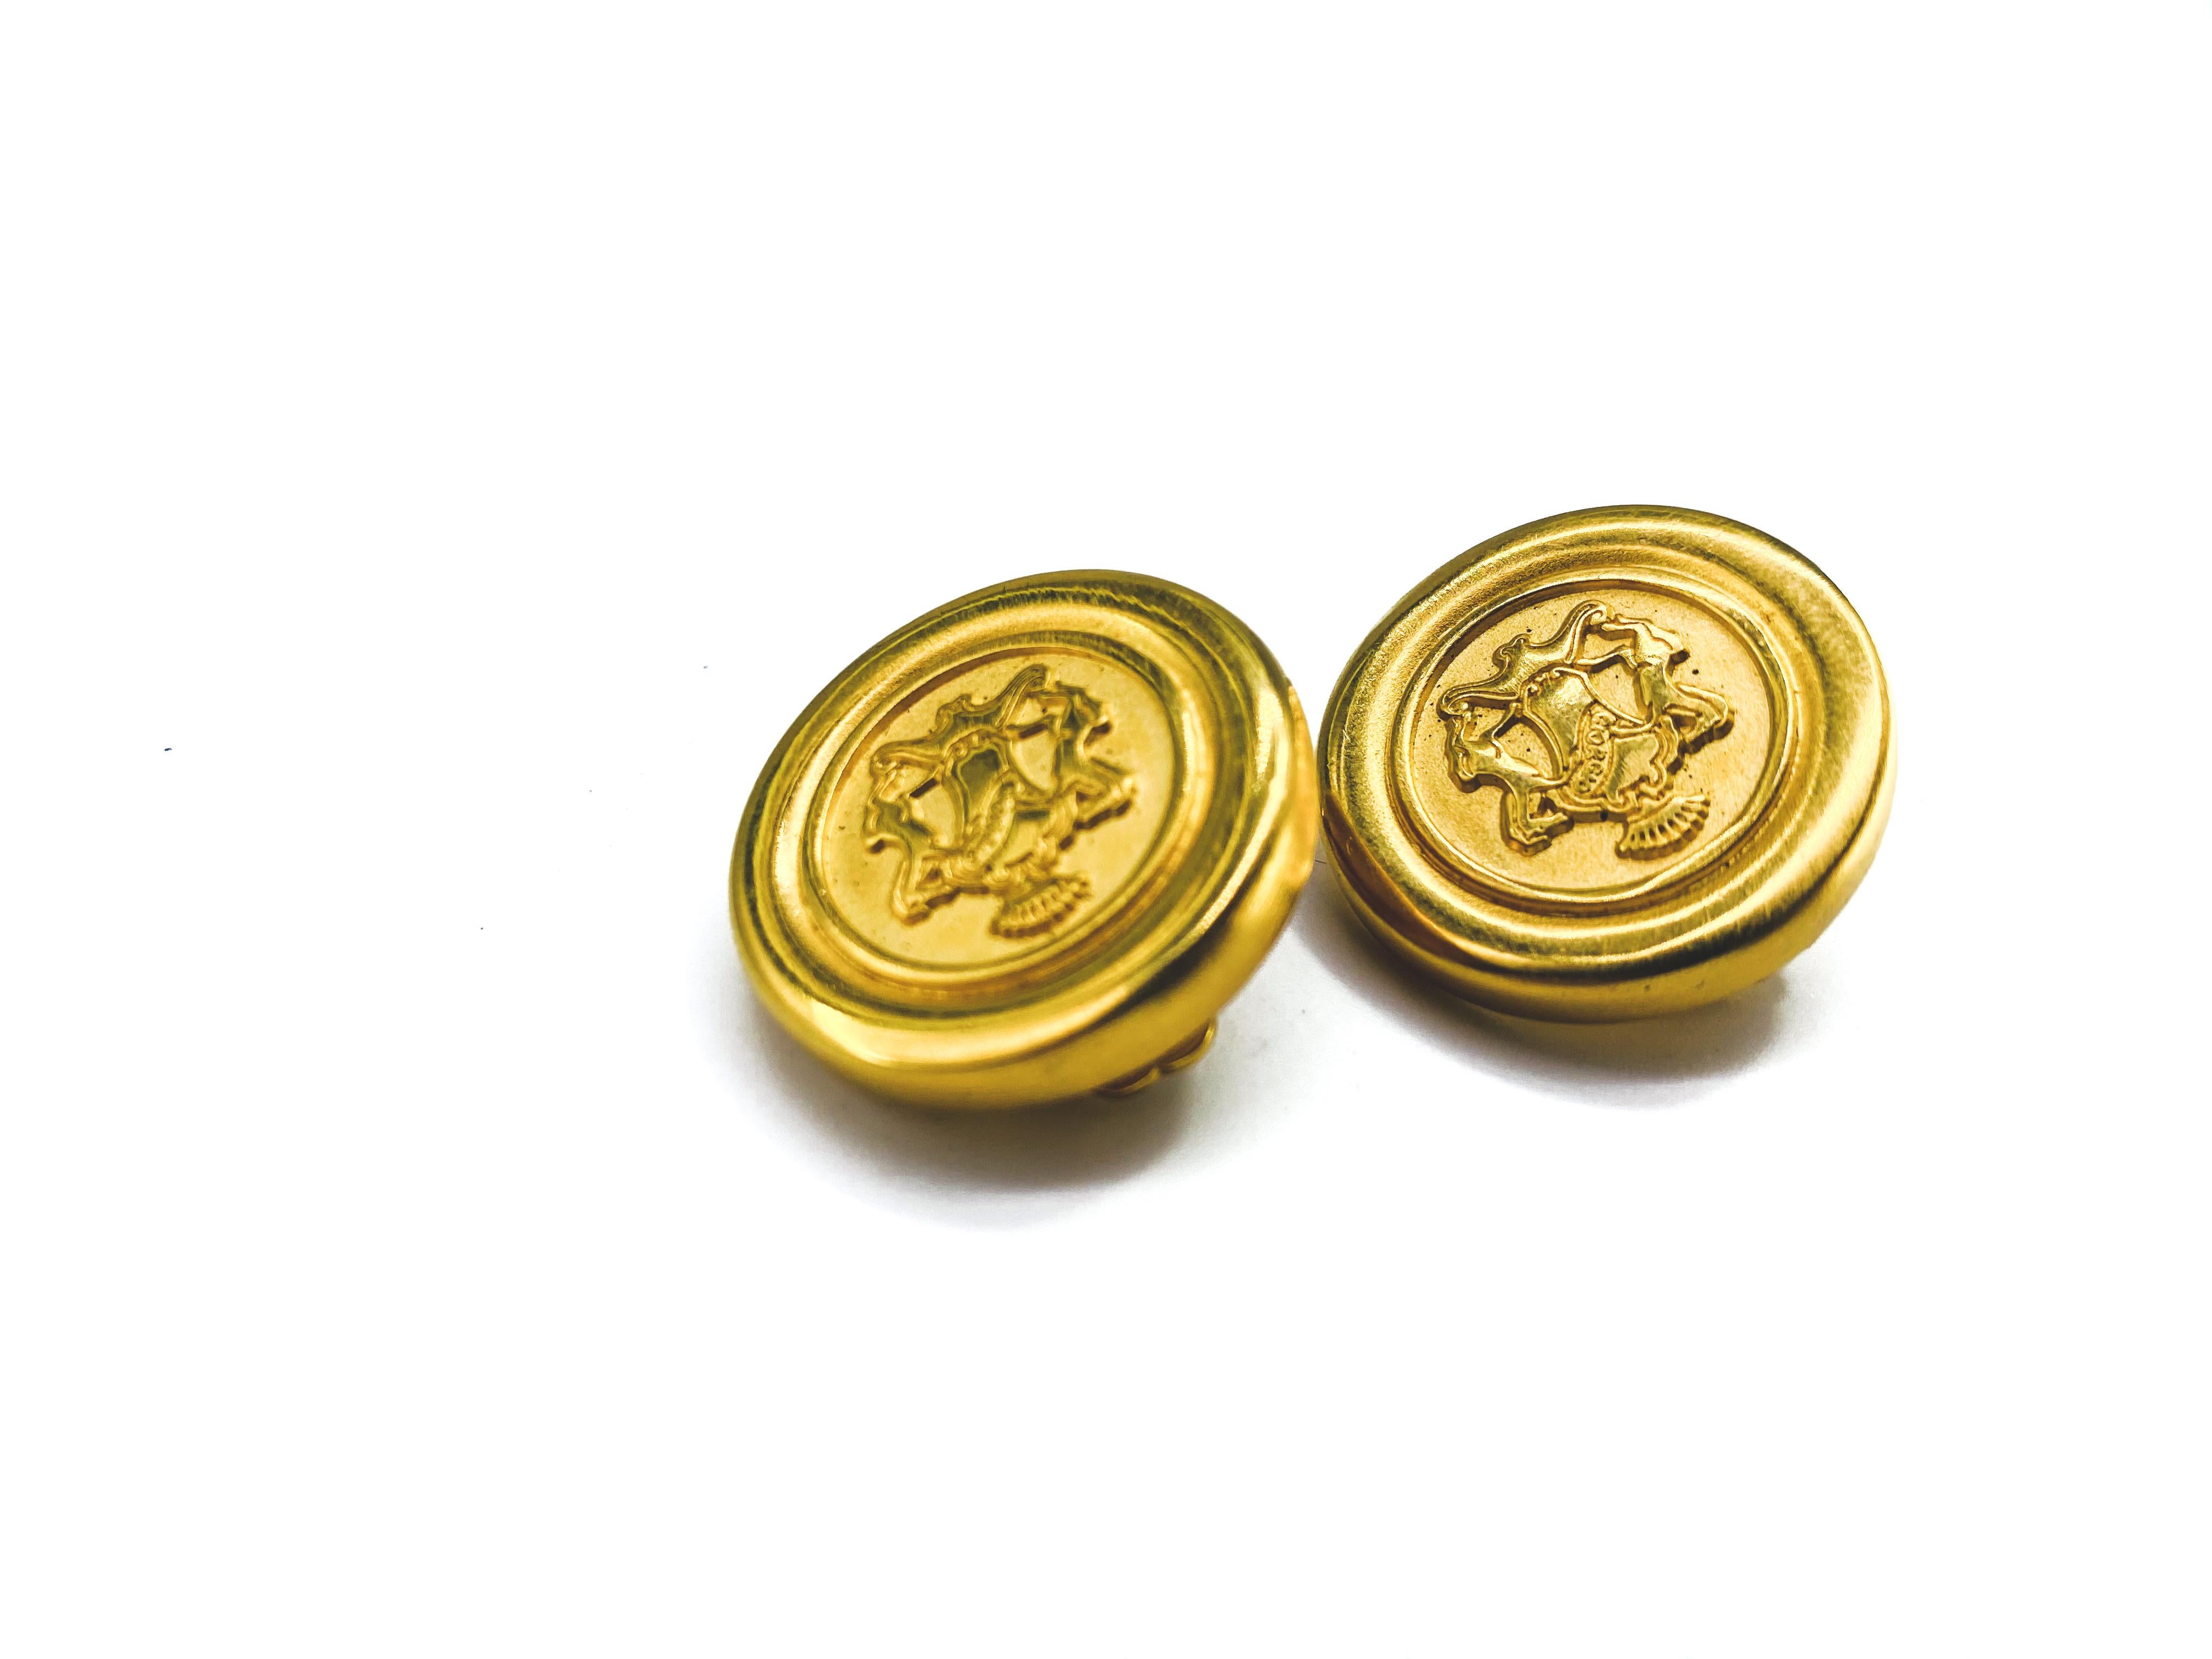 Giorgio Armani 1980s Vintage Clip On Earrings

Detail
-Cast from quality gold colored metal
-Embossed with the iconic Giorgio Armani coat of arms

Size & Fit
-1 inch/2.54cm across
-Strong, comfortable clips

Authenticity & Condition
-Fully examined